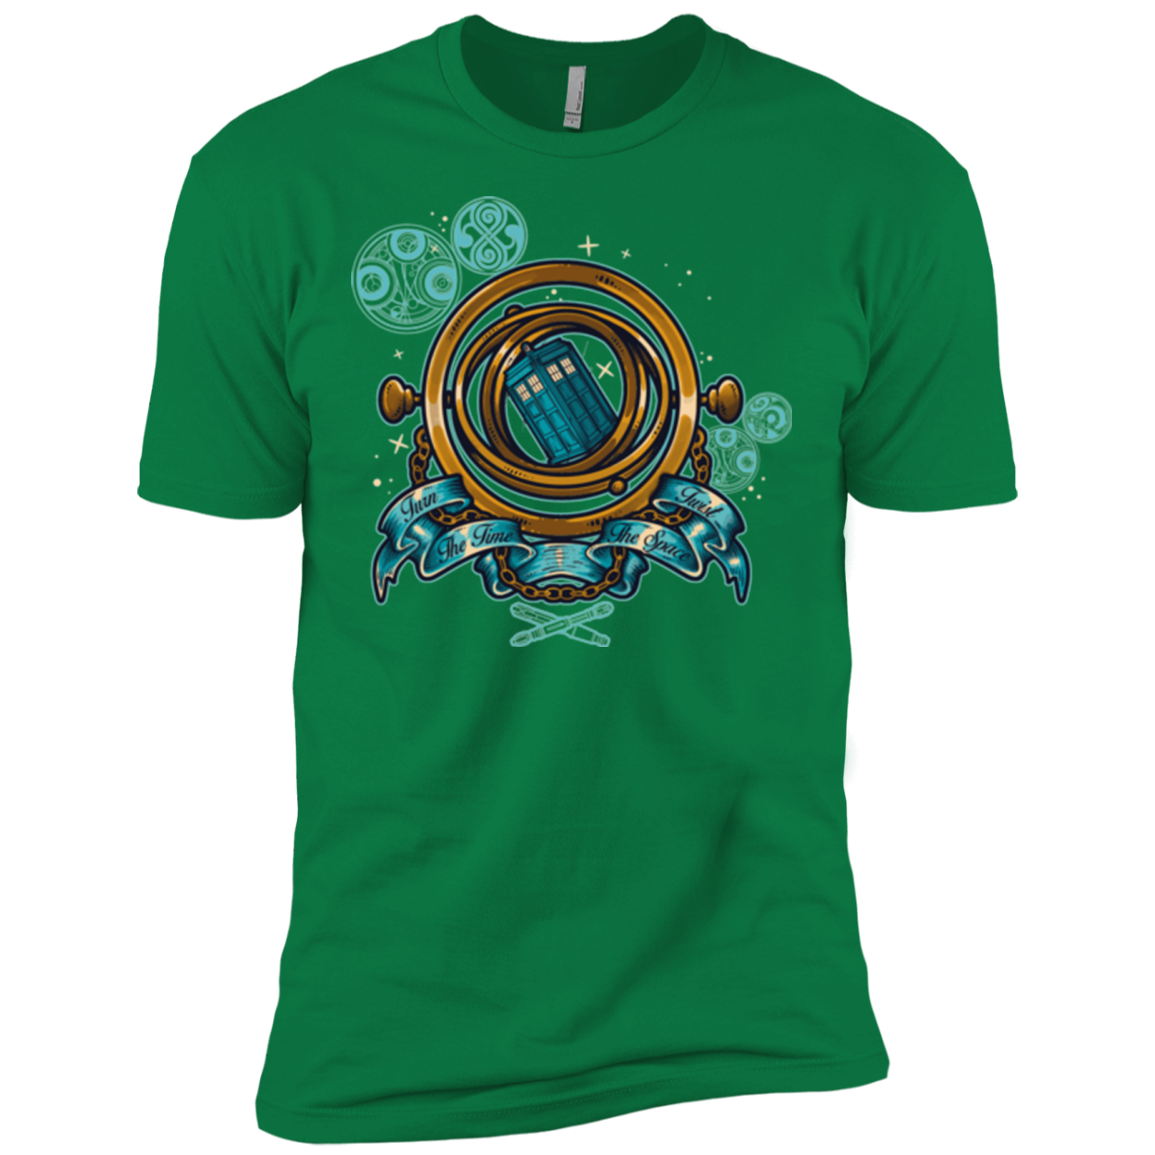 TURN THE TIME TWIST THE SPACE Men's Premium T-Shirt